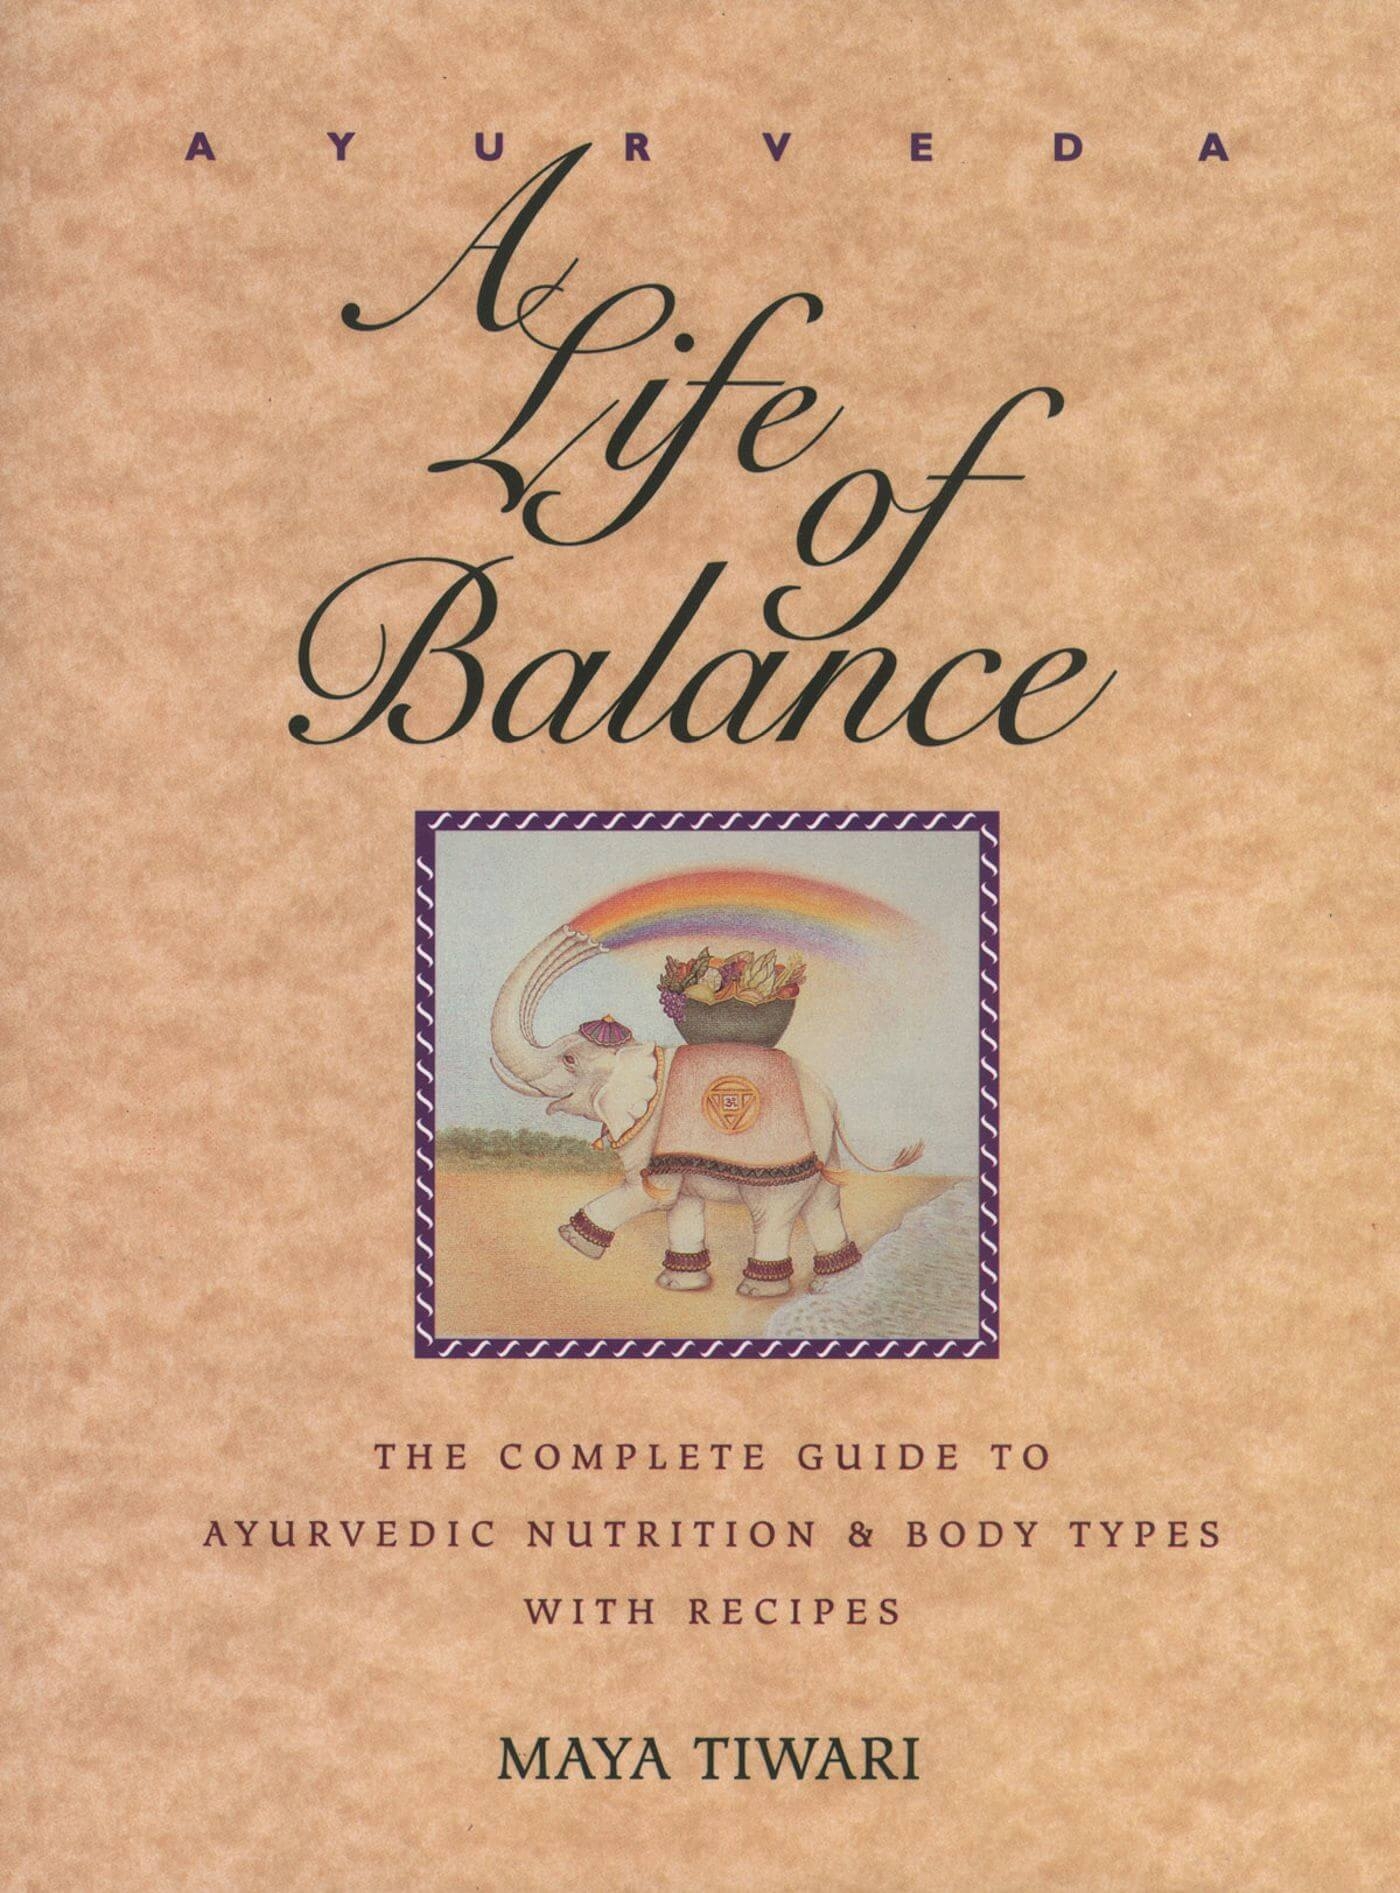 Ayurveda: A Life of Balance - The Complete Guide to Ayurvedic Nutrition